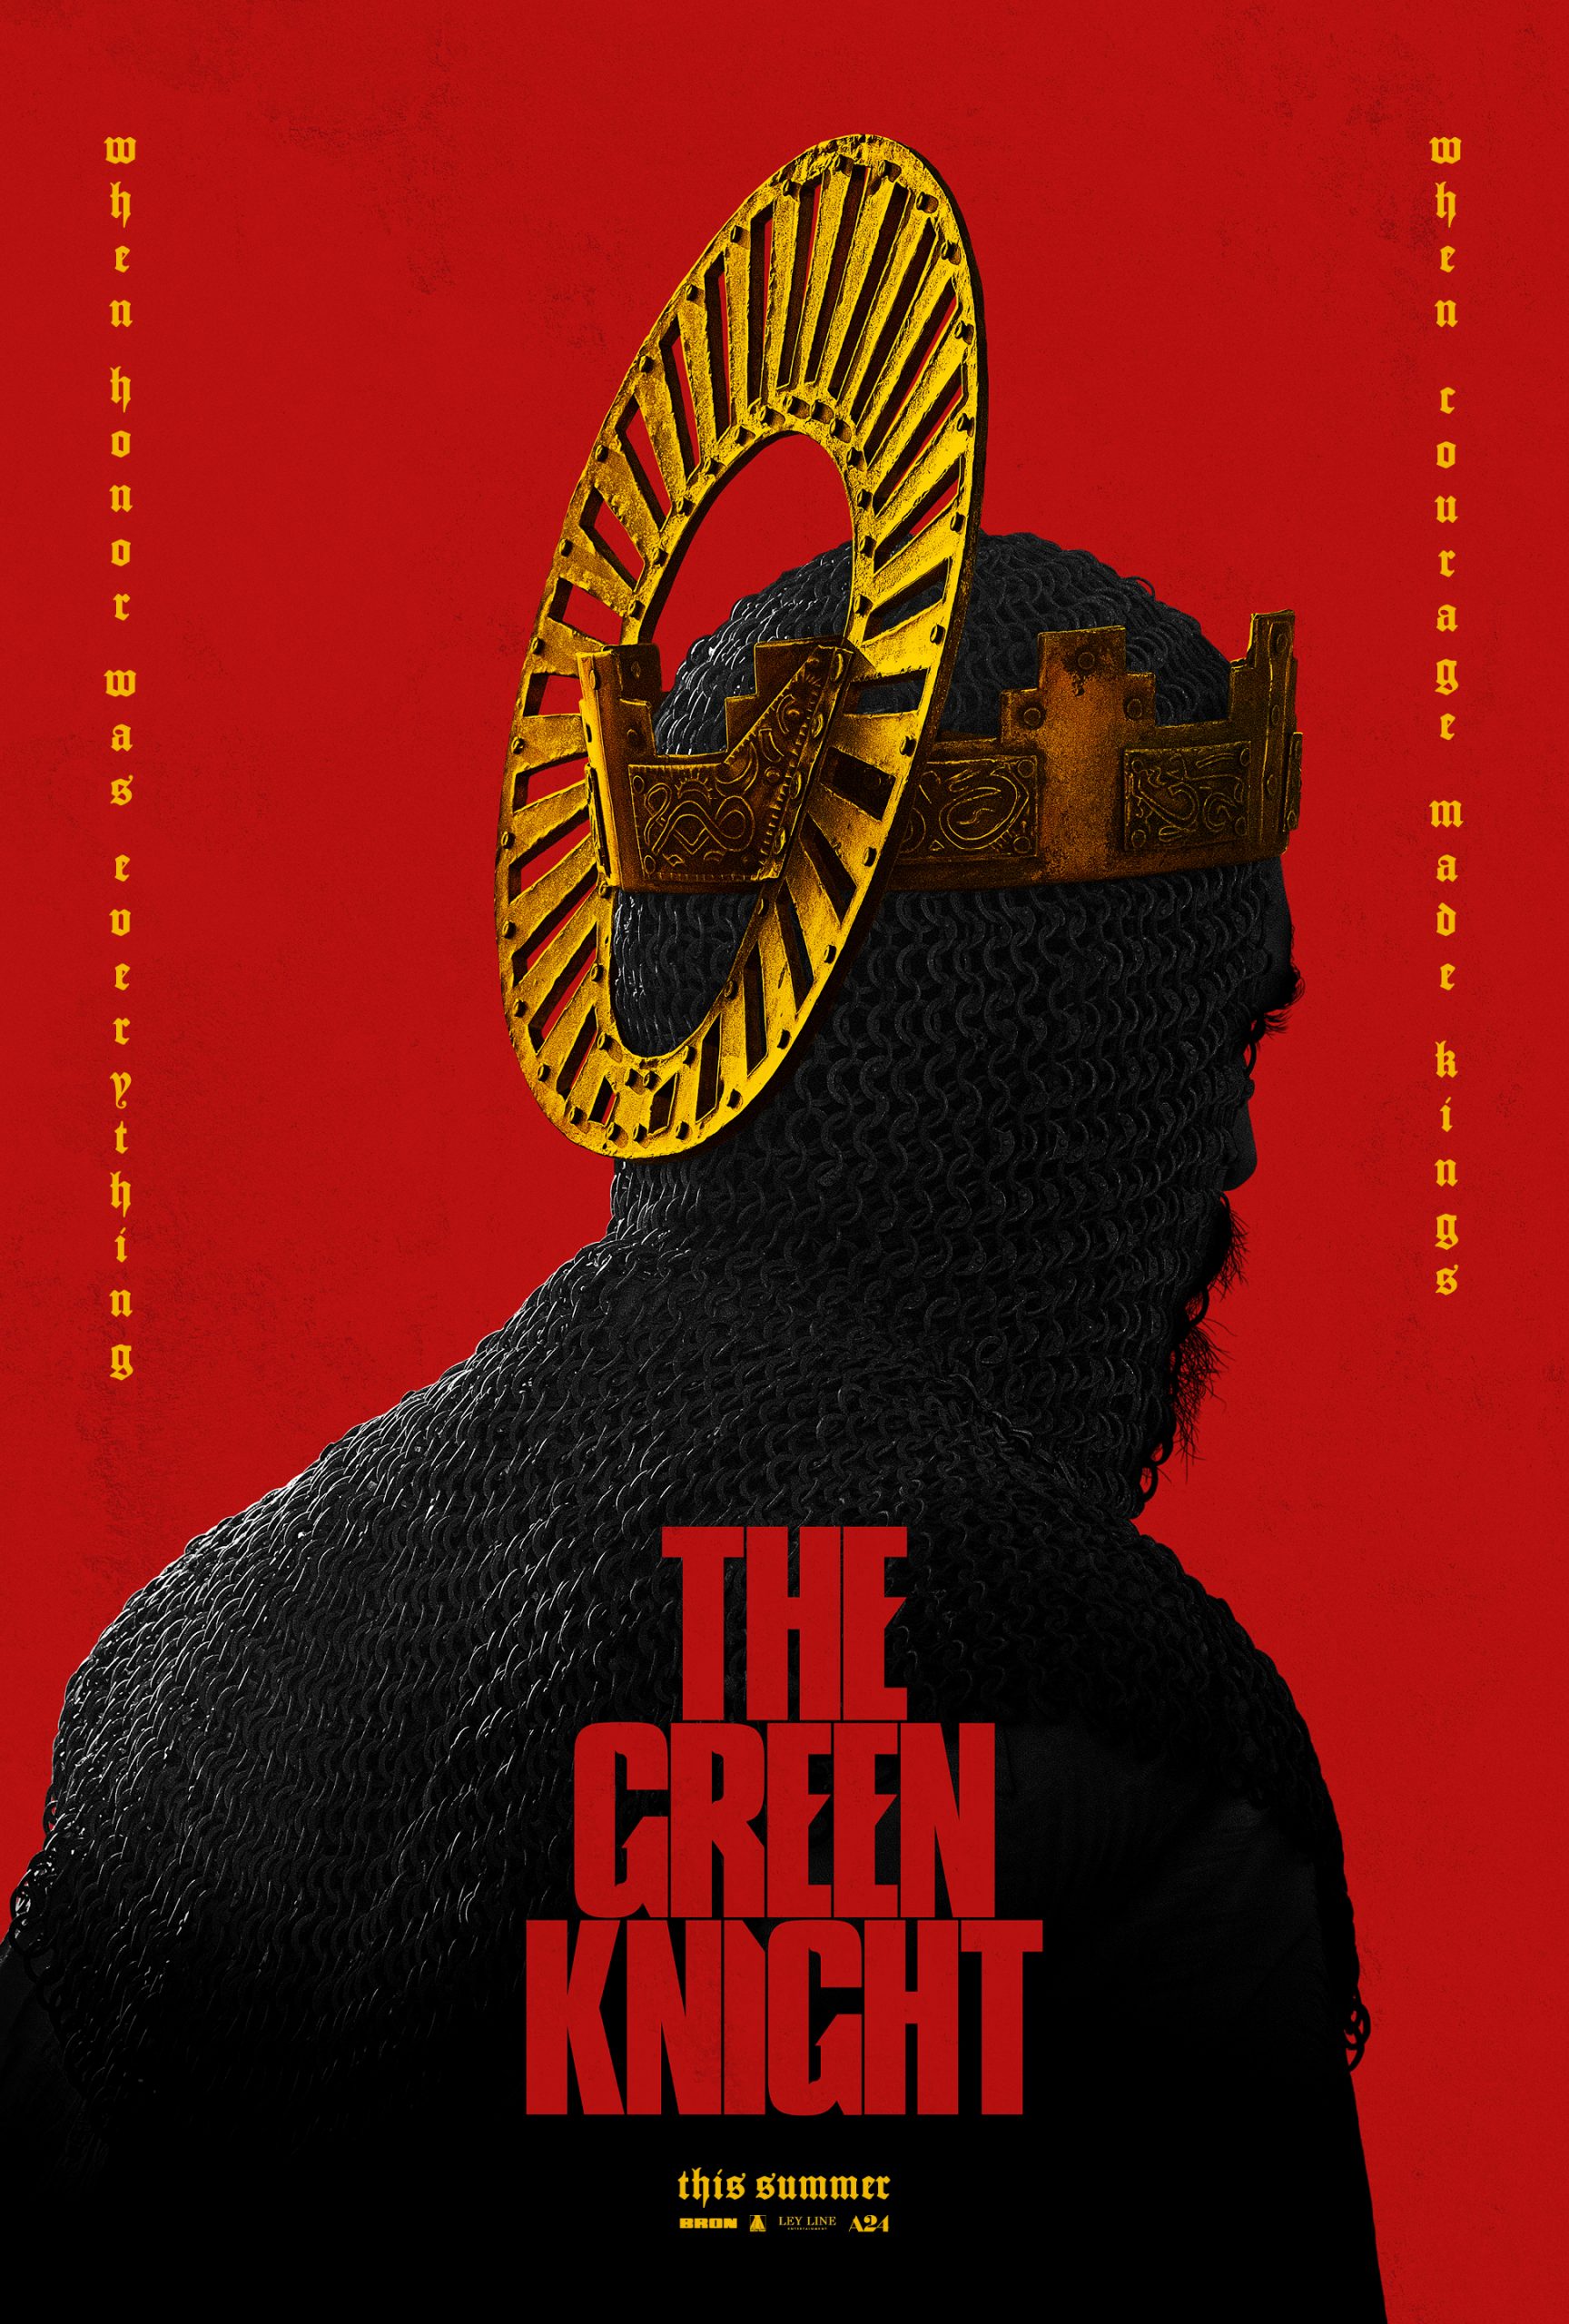 [News] Dive Into David Lowery's THE GREEN KNIGHT Teaser Trailer